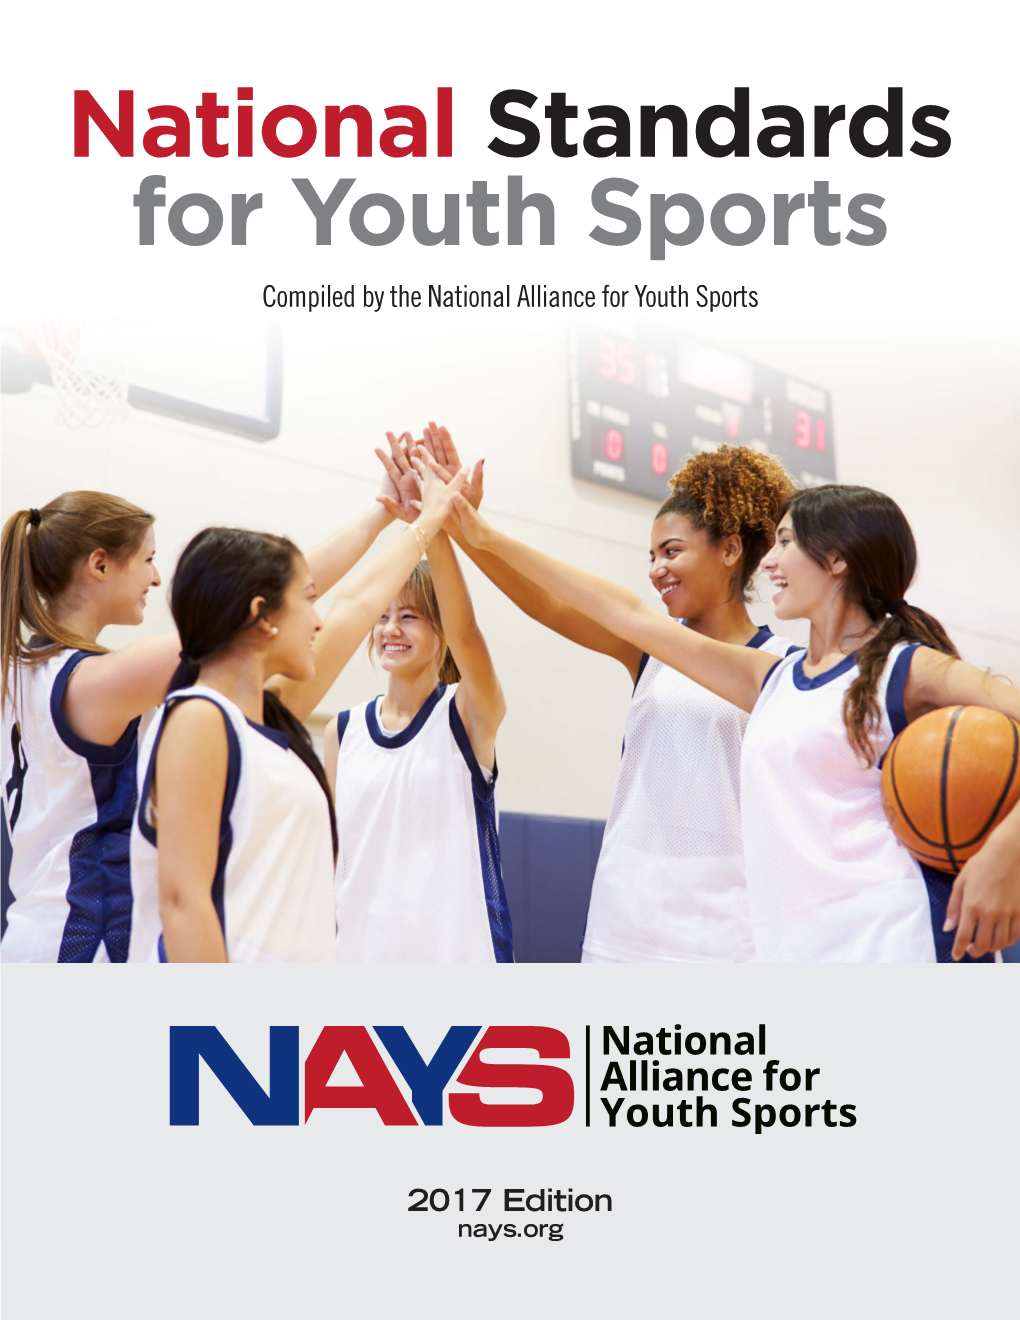 National Standards for Youth Sports Compiled by the National Alliance for Youth Sports